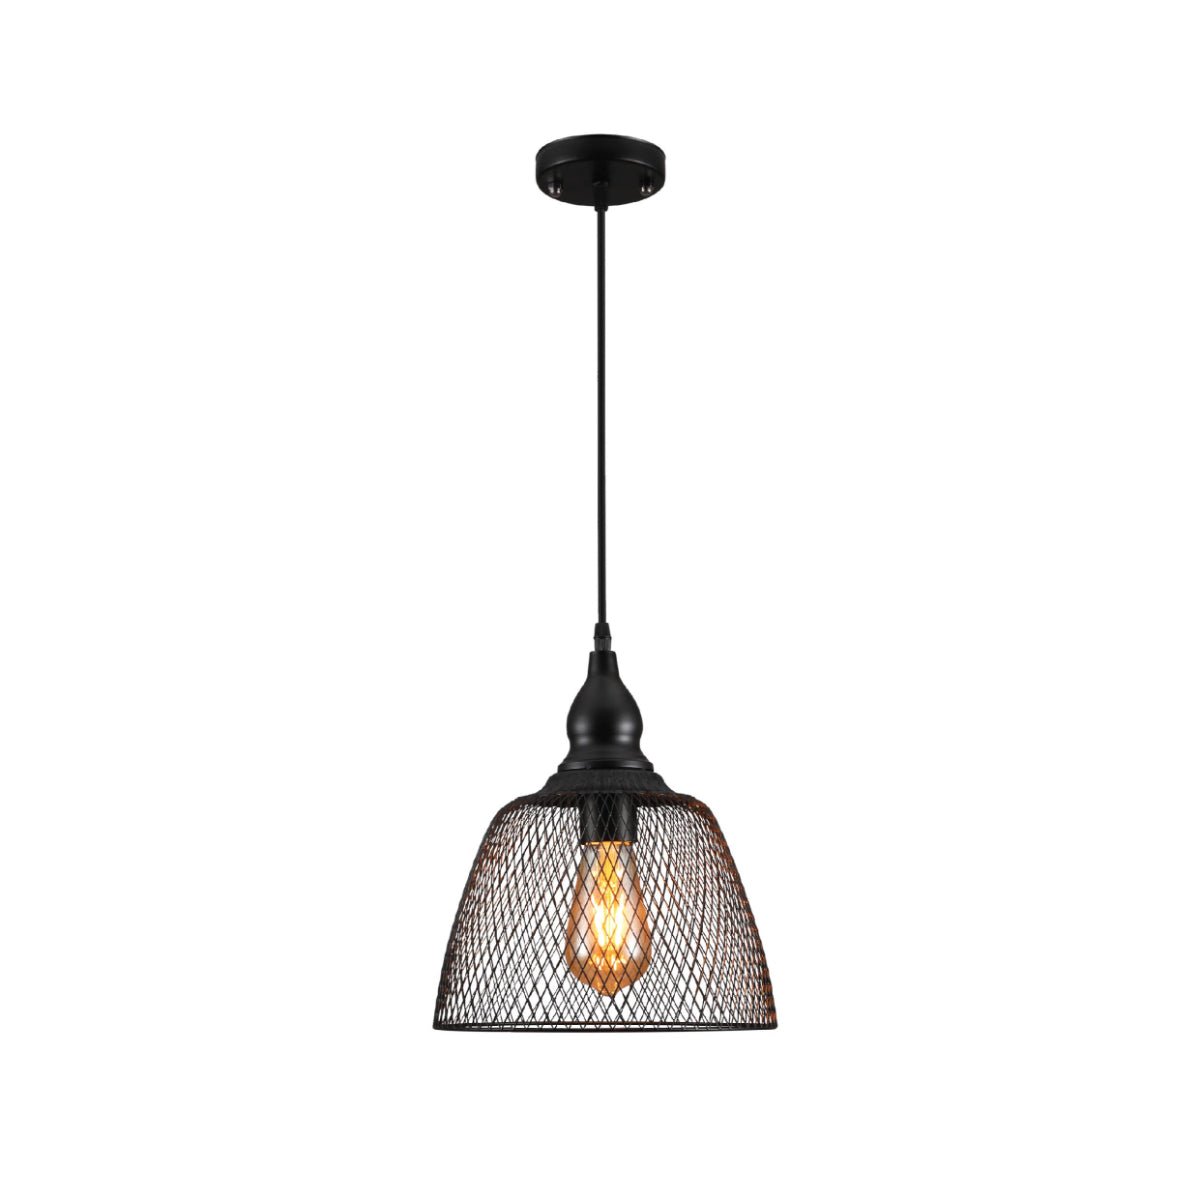 Main image of Wire Mesh Industrial Dome Pendant Ceiling Light with E27 | TEKLED 159-17754